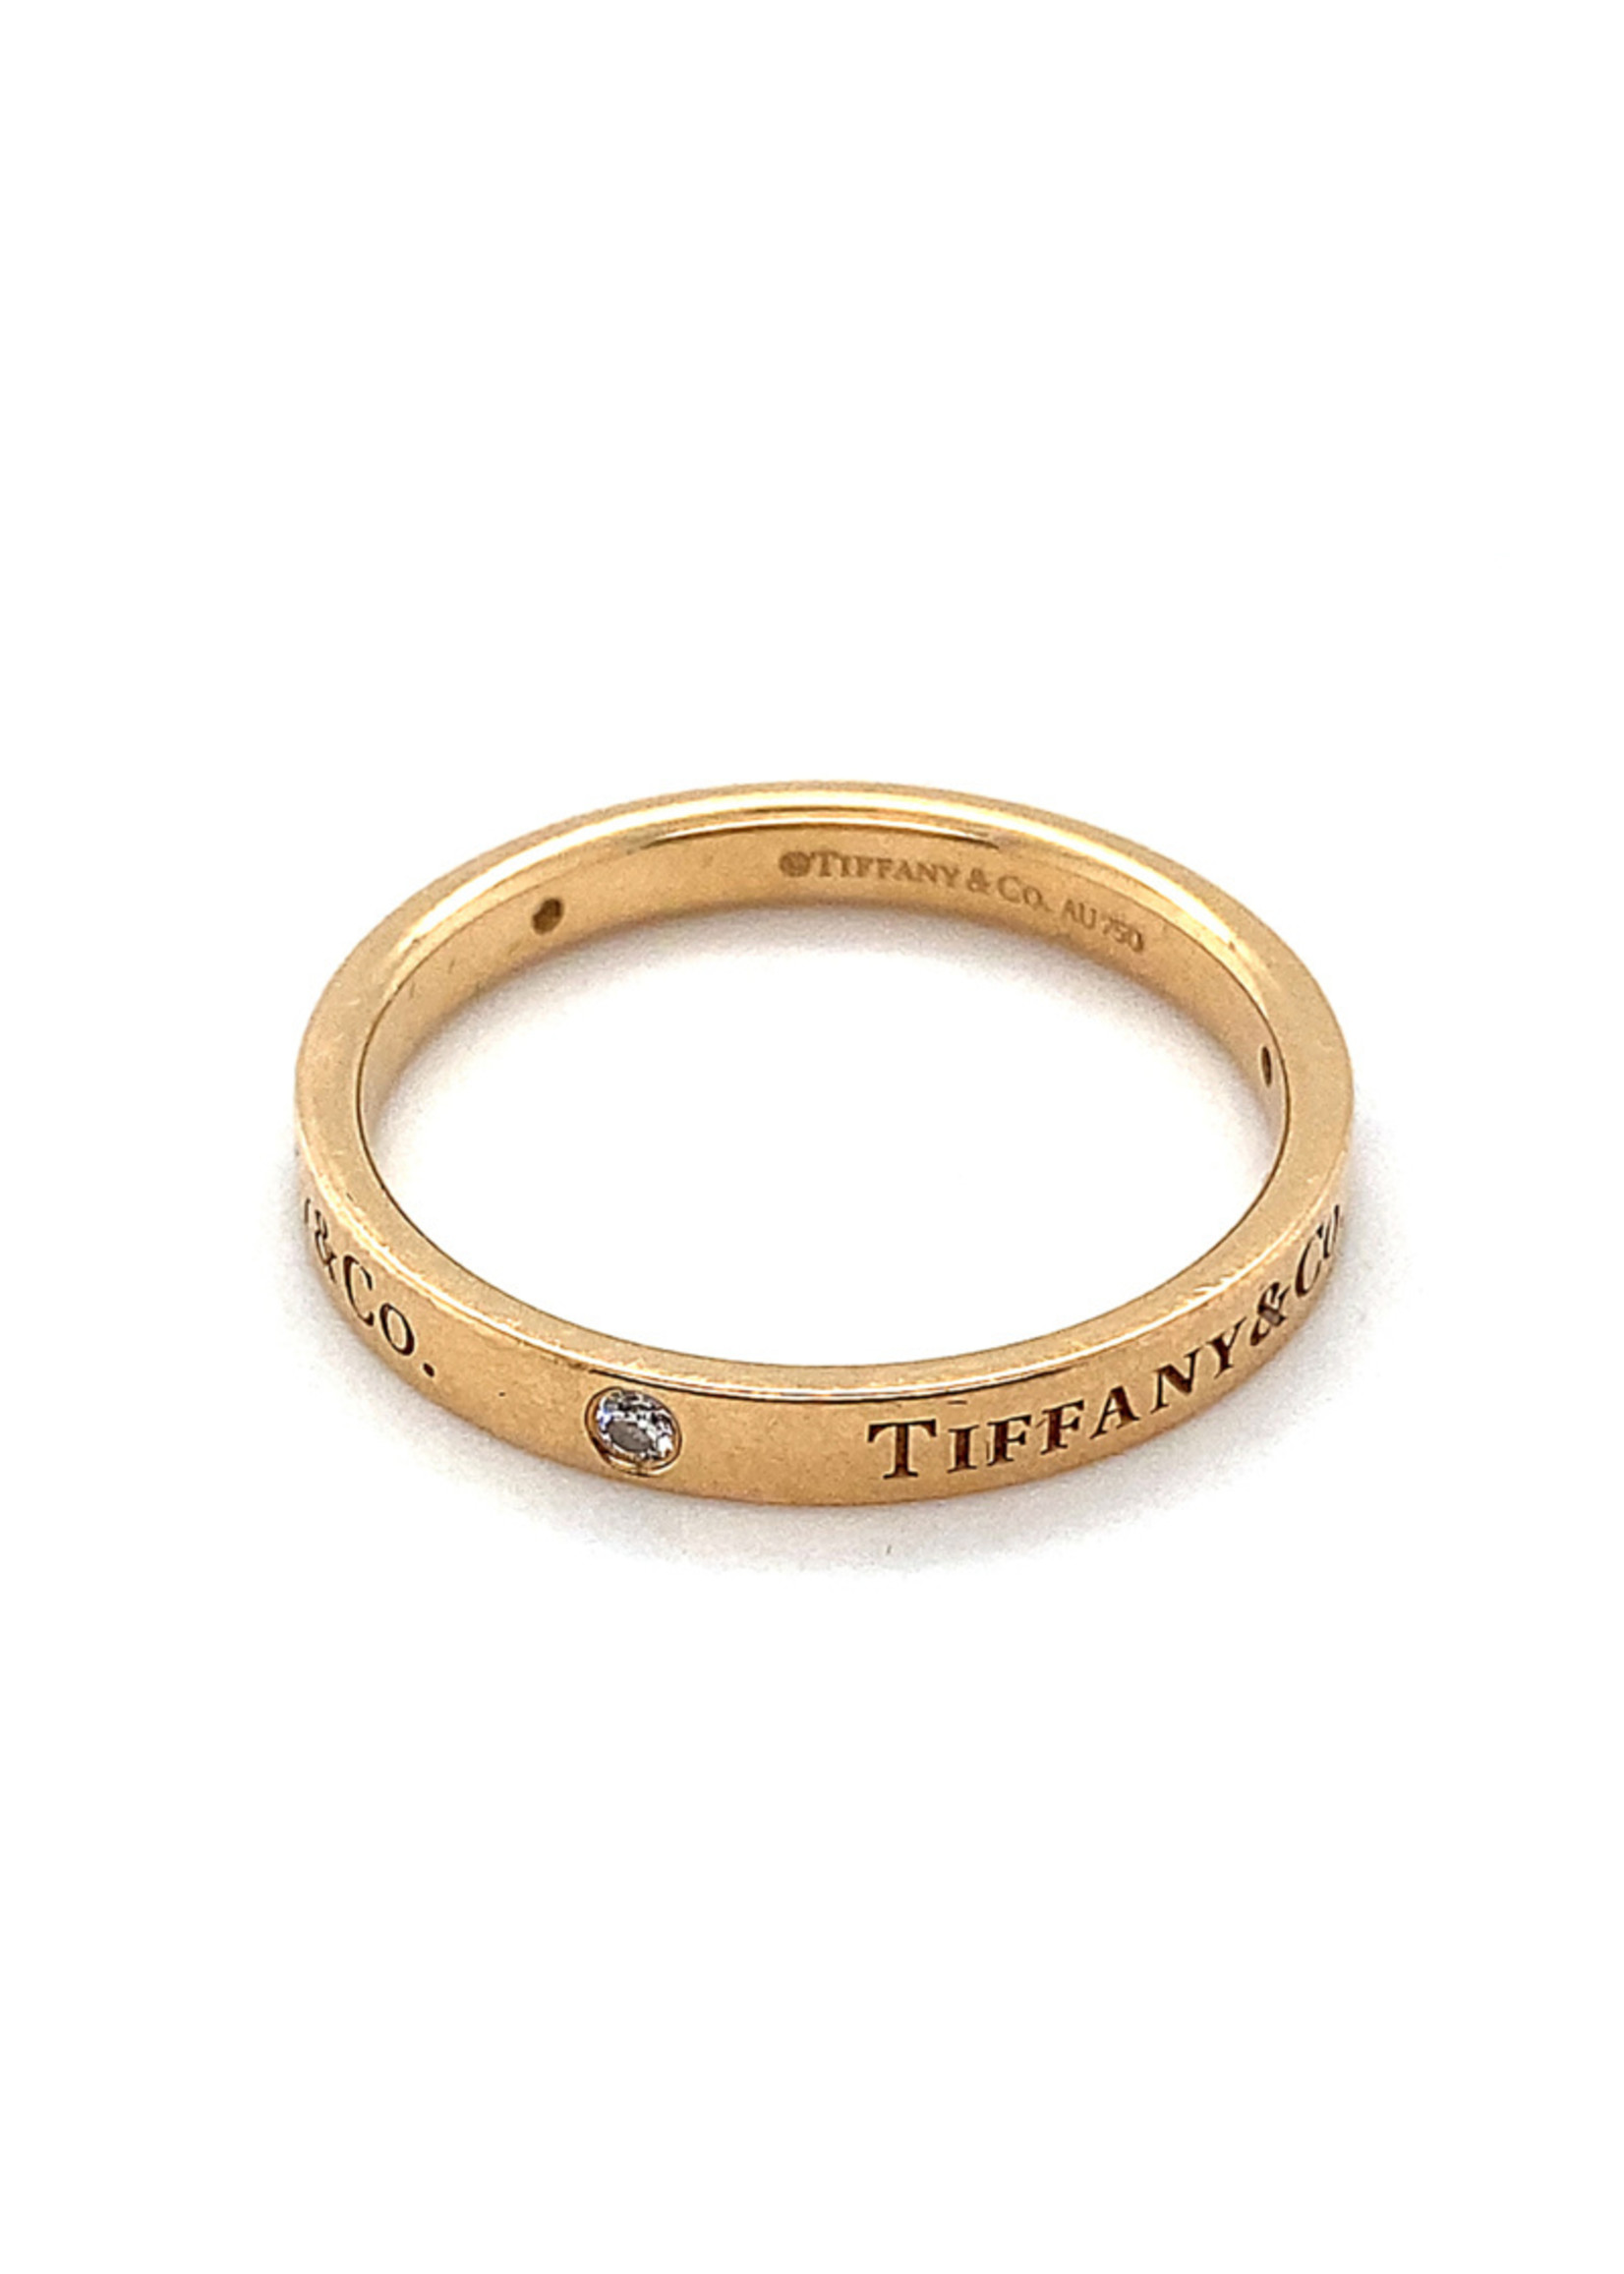 Vintage & Occasion Occasion originele Tiffany & Co gouden band ring met 0.12ct diamant - Copy